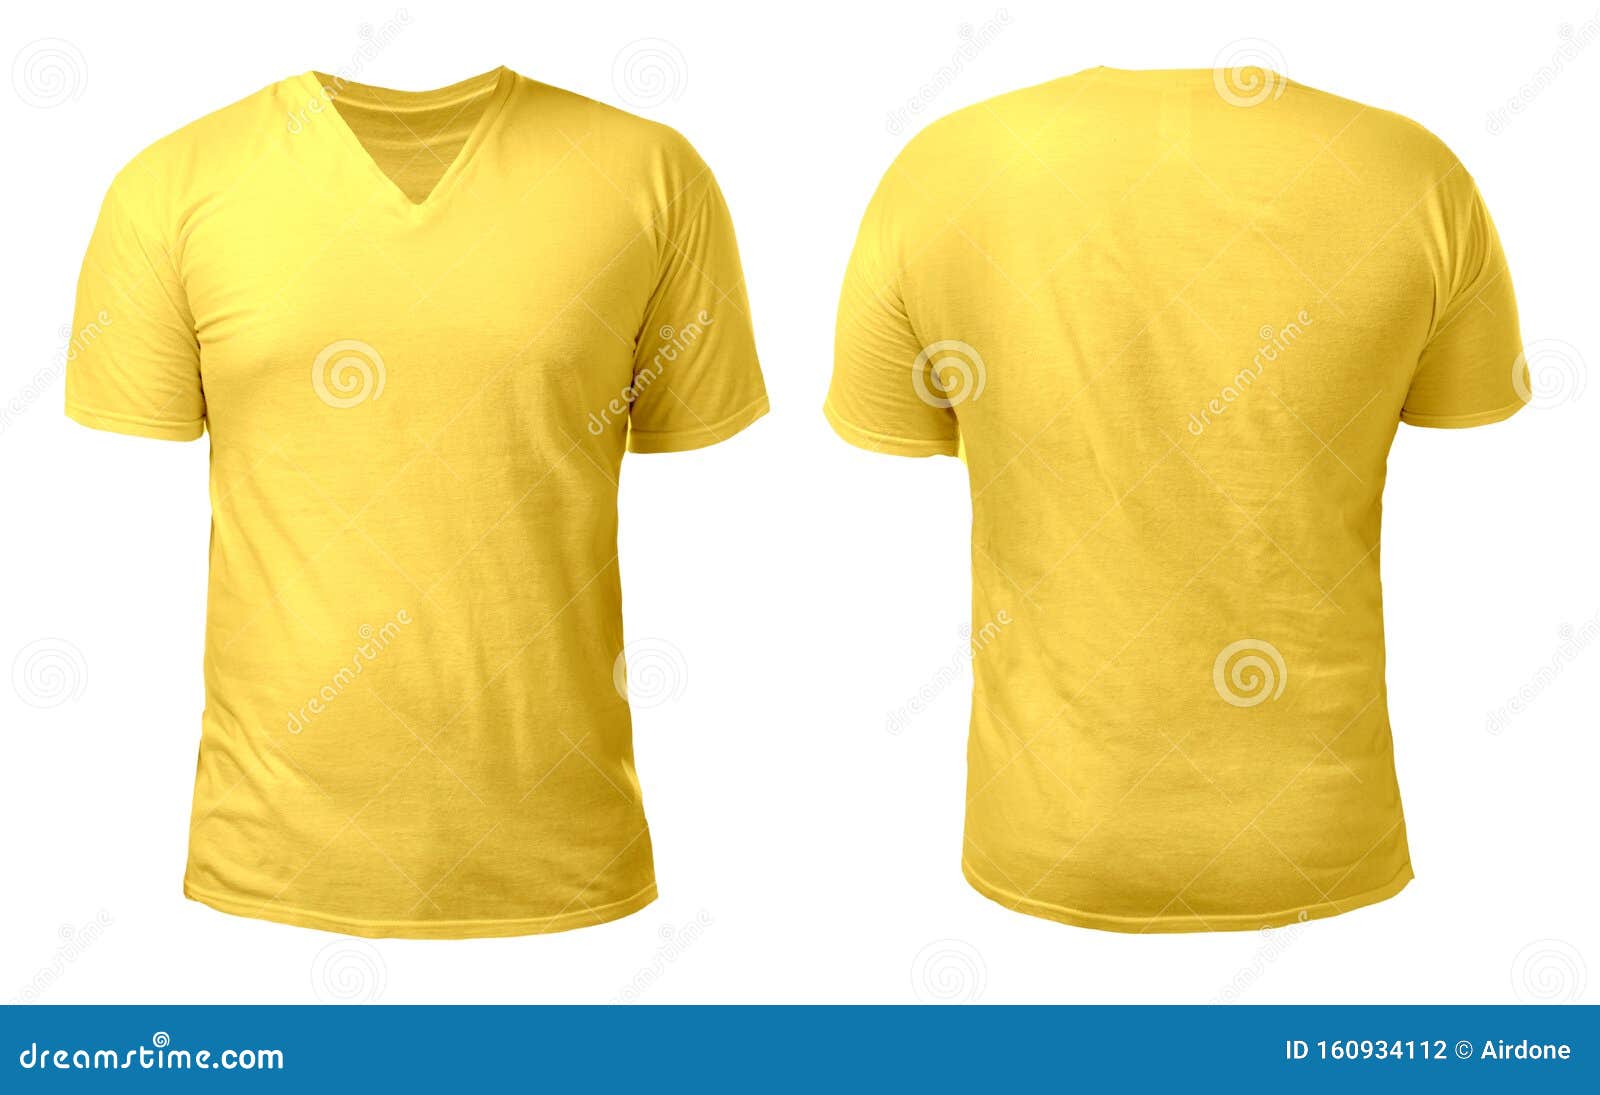 Download 8 Yellow V Neck Shirt Design Template Photos Free Royalty Free Stock Photos From Dreamstime PSD Mockup Templates